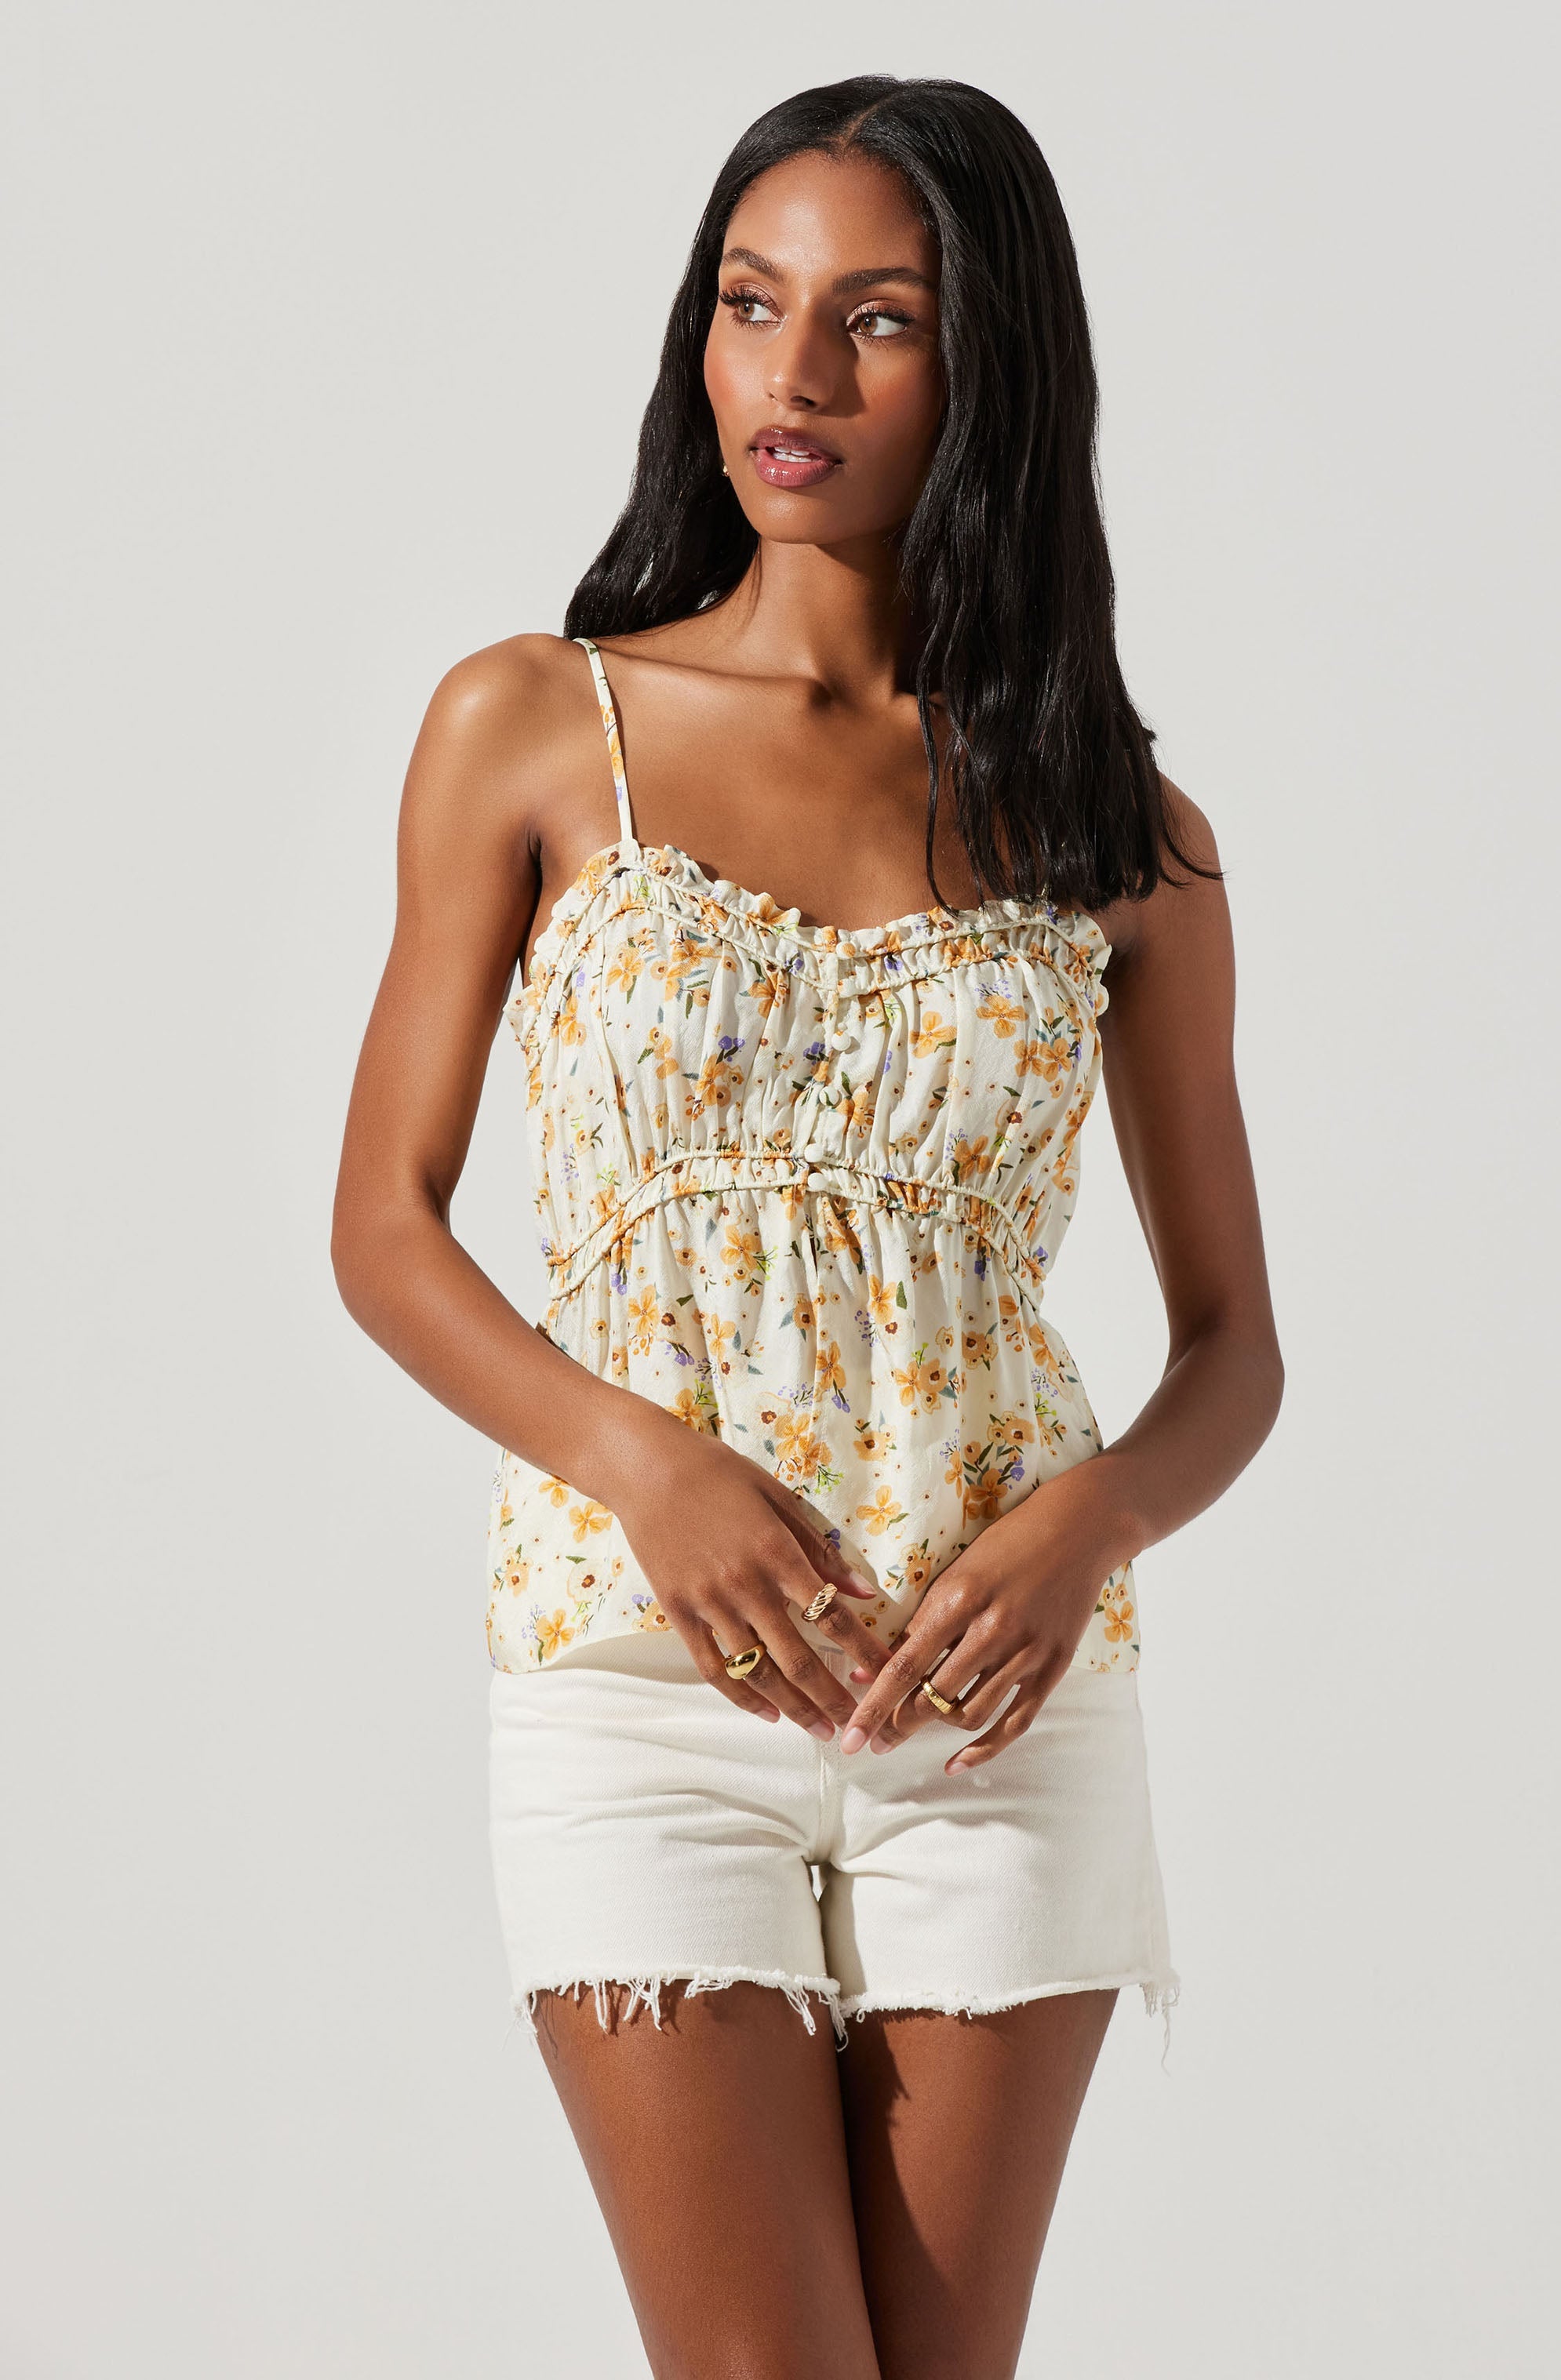 URBAN OUTFITTERS CREAM TABATHA ALLOVER LACE BABYDOLL CAMI TOP Sz L